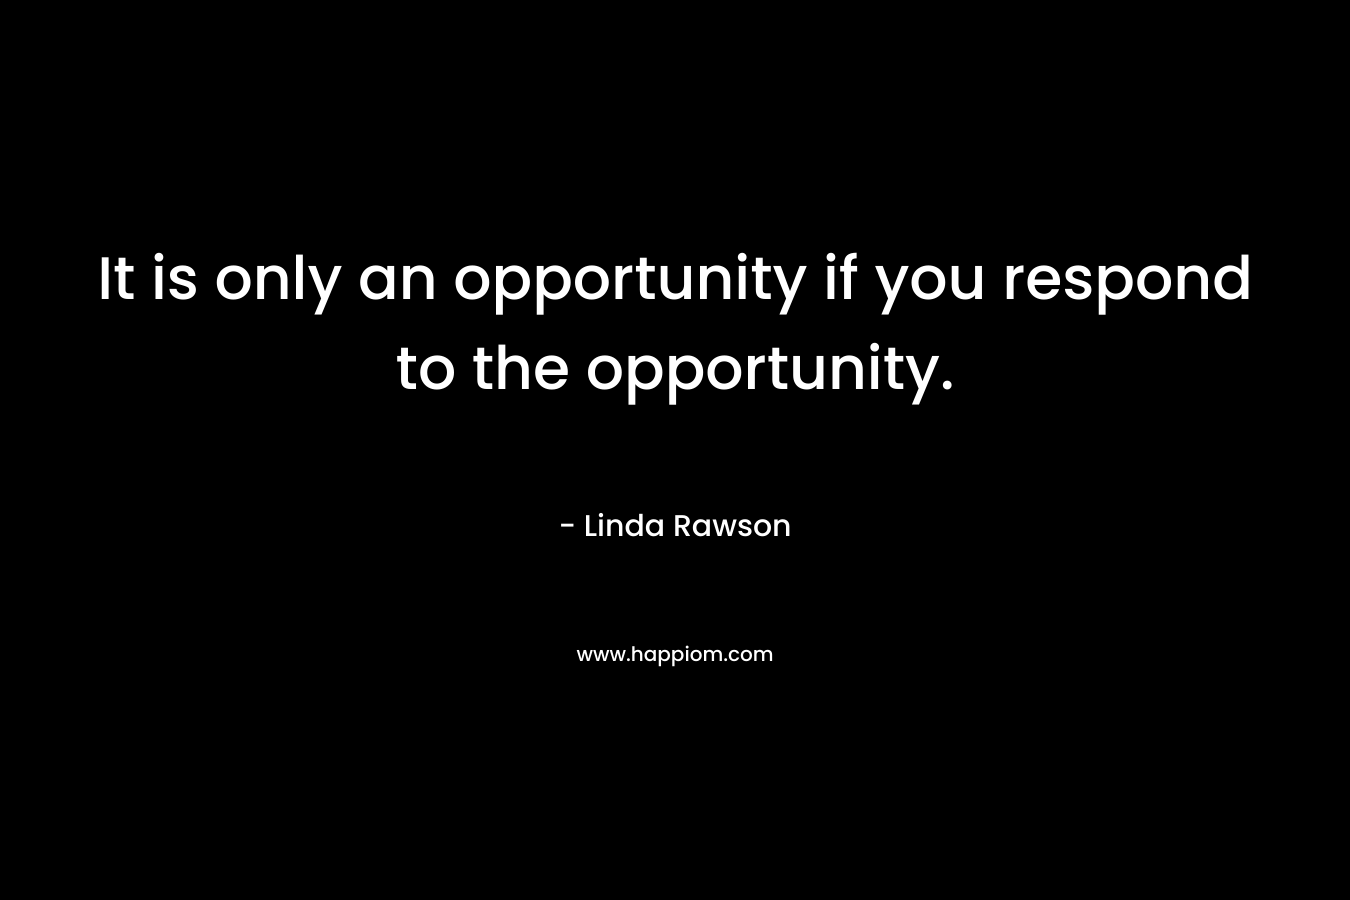 It is only an opportunity if you respond to the opportunity.